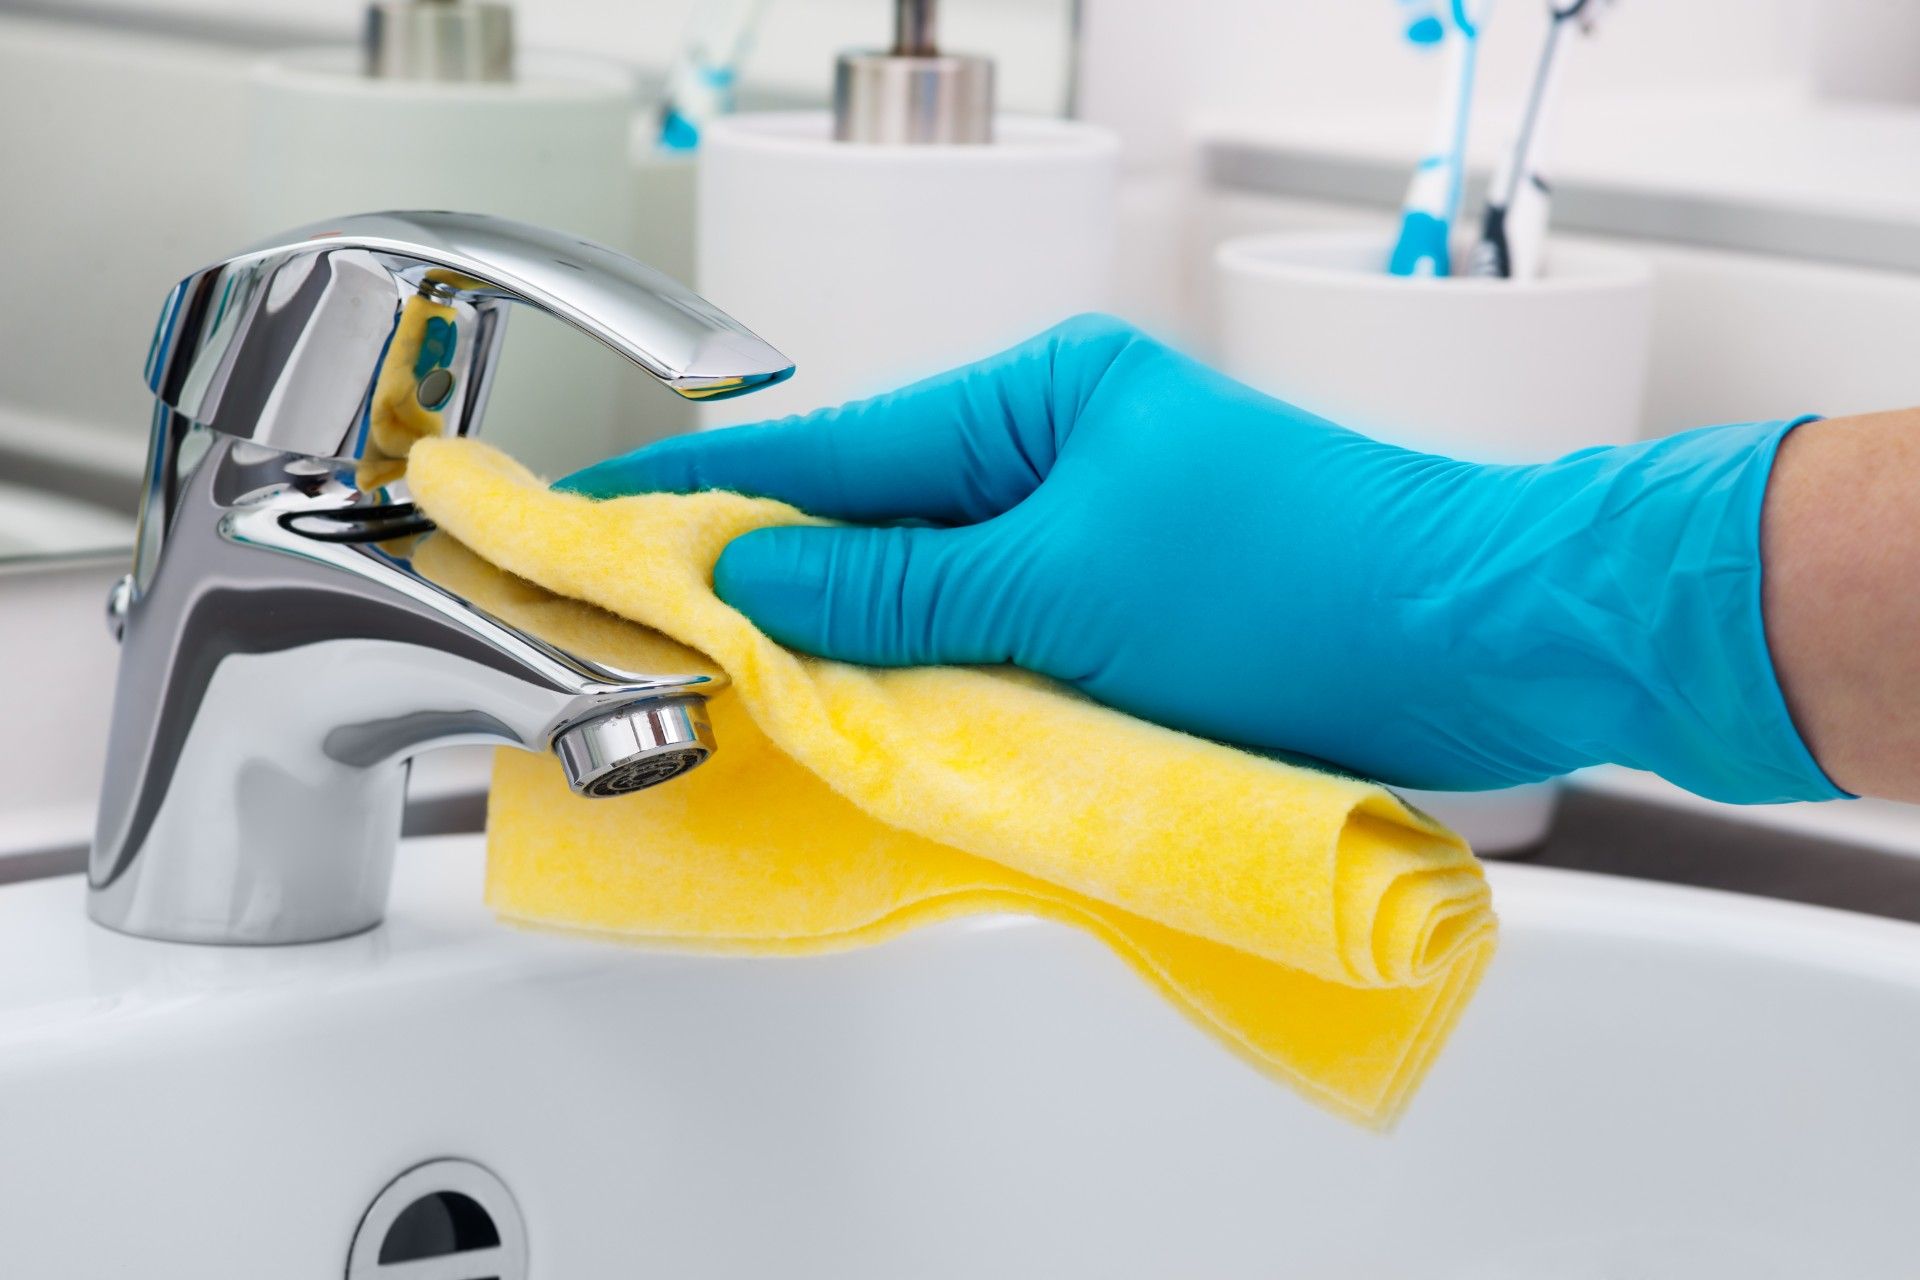 Person wearing a blue rubber glove, cleaning a bathroom sink faucet with a yellow cloth